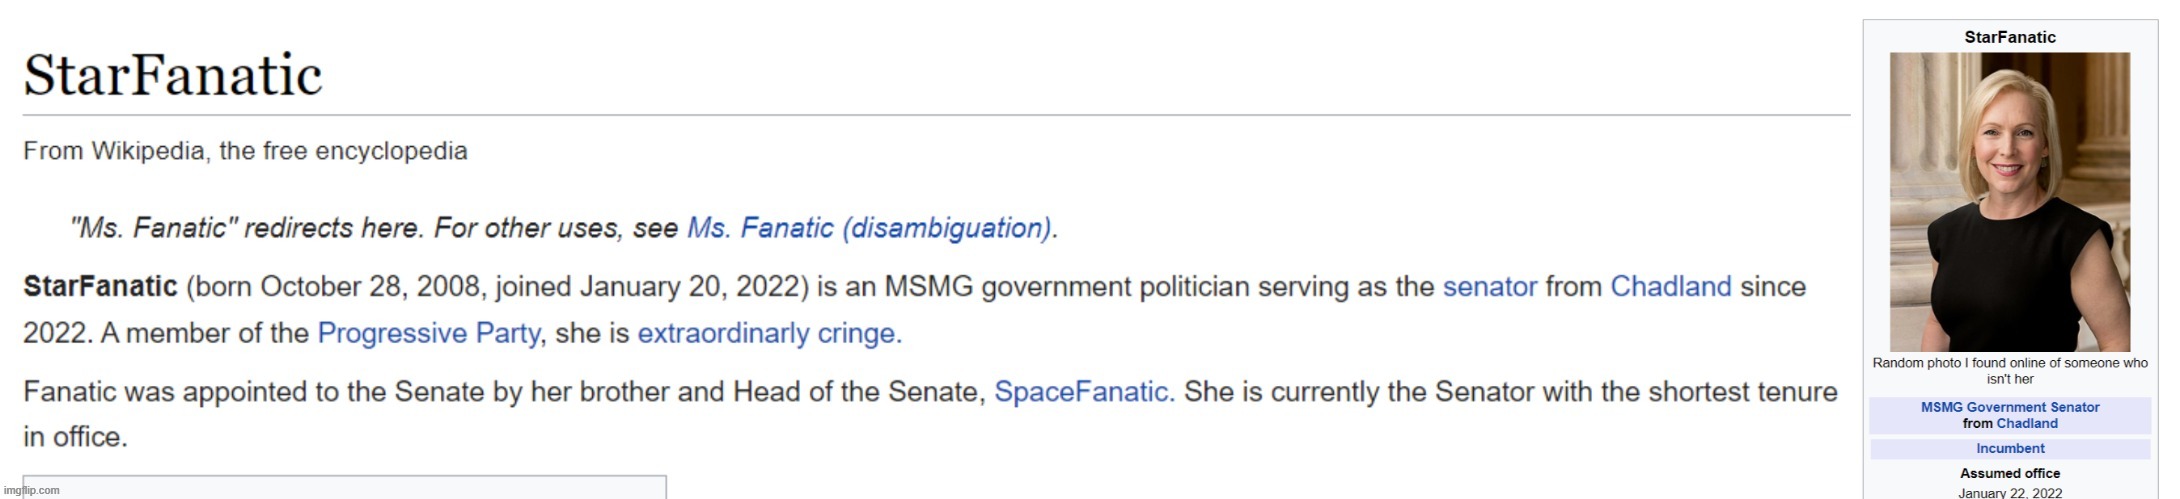 Every politician's Wikipedia page part 2 | made w/ Imgflip meme maker